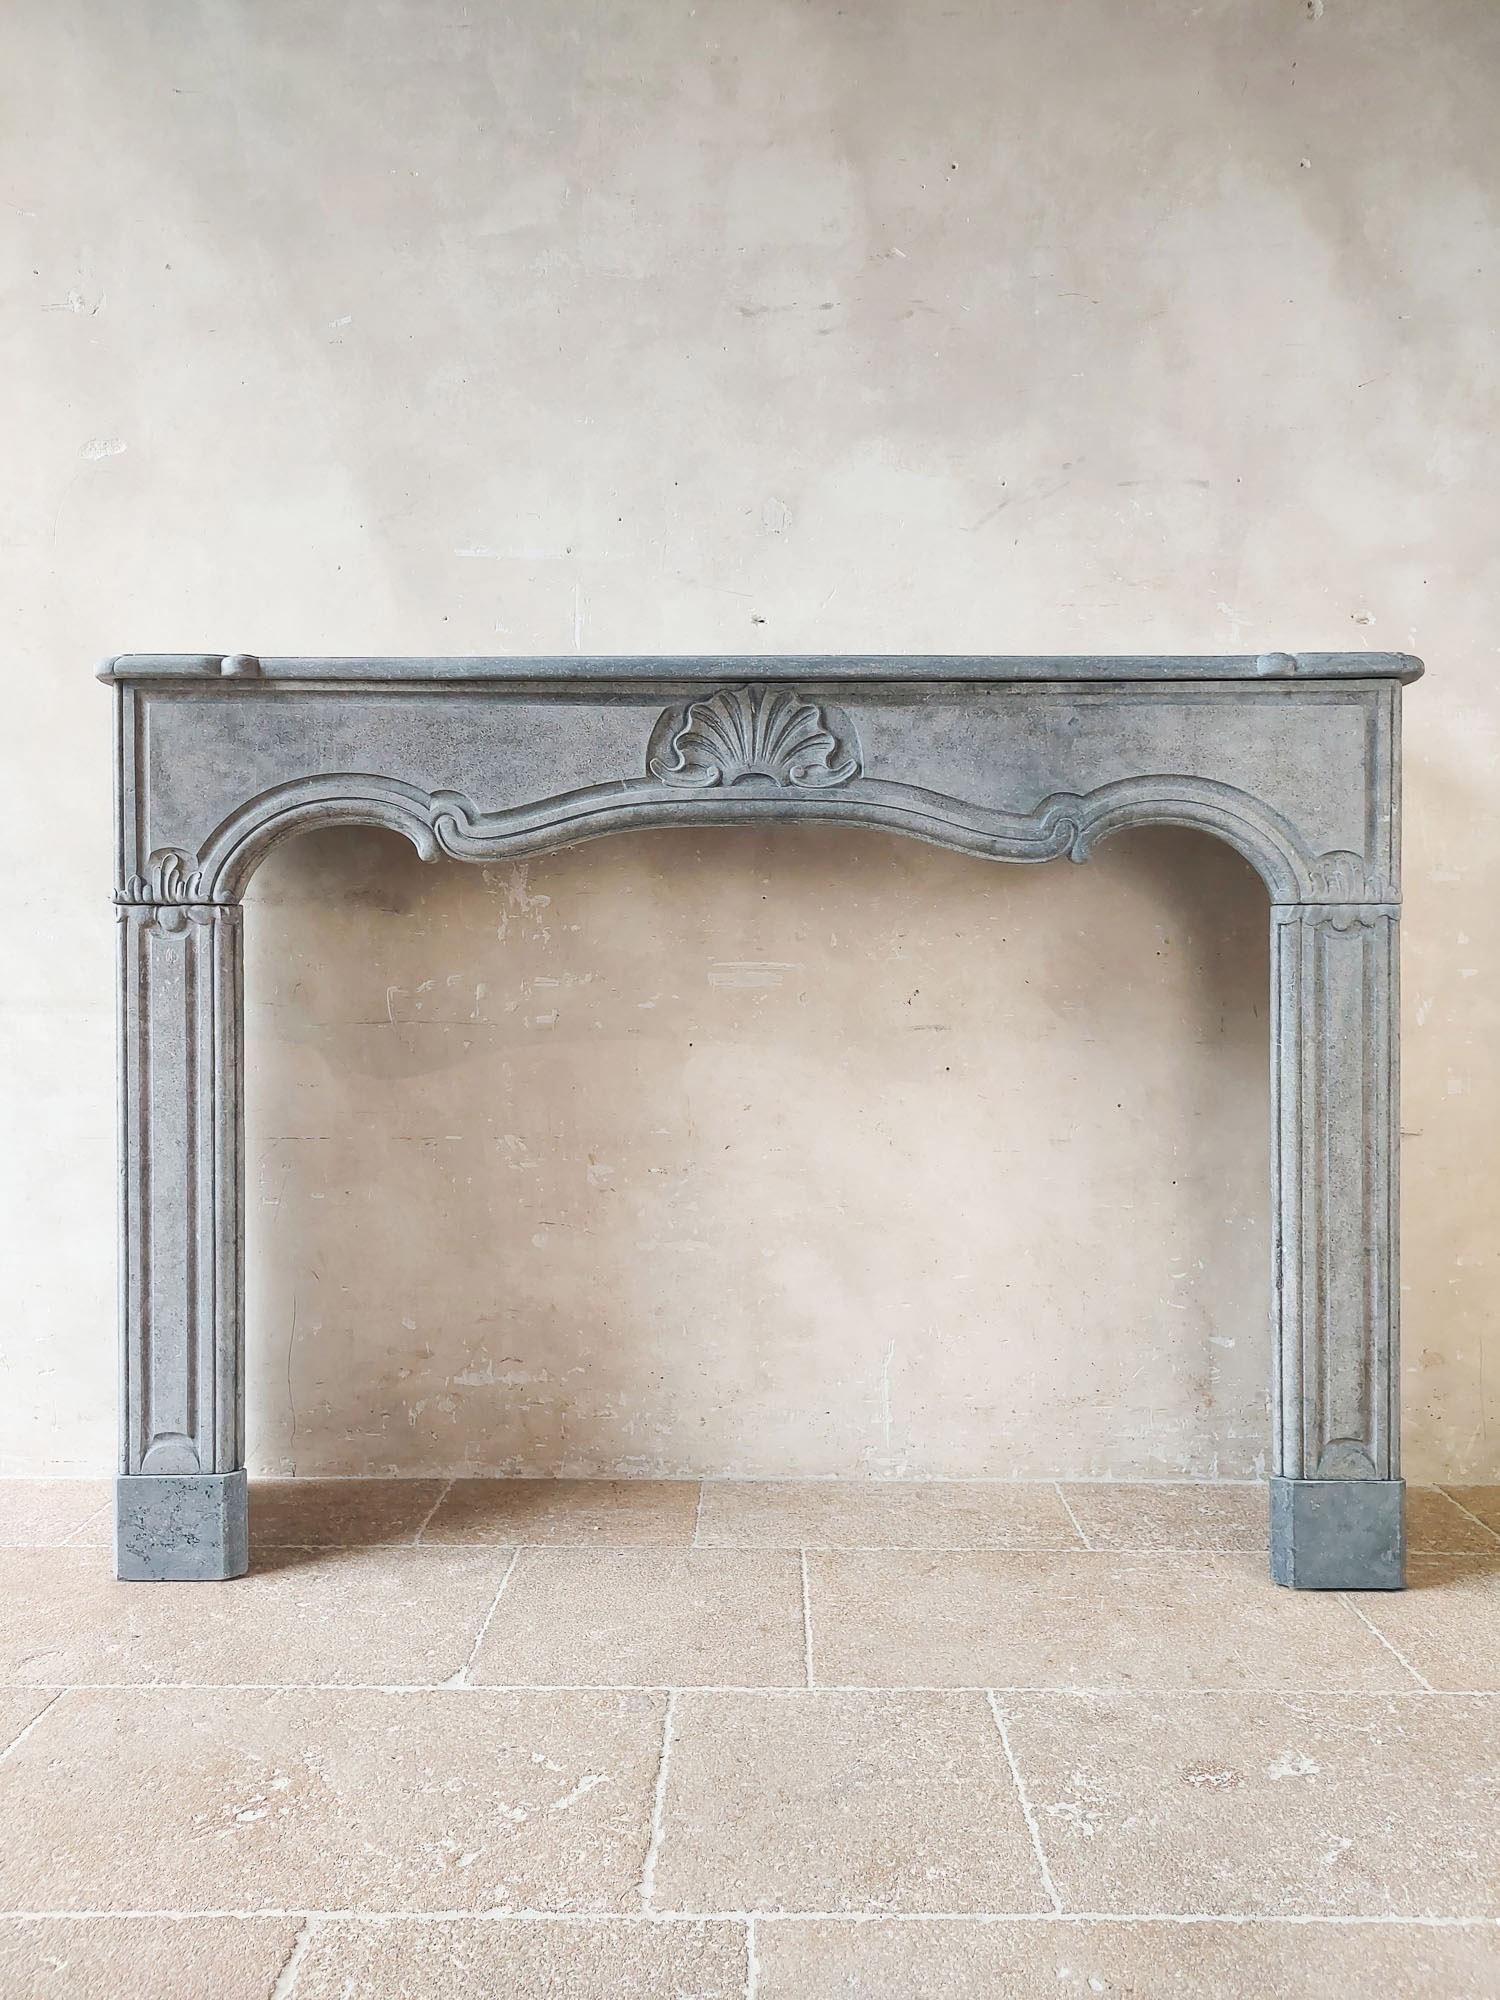 18th century Amsterdam bluestone fireplace in Louis the Fourteenth style. This mantle is made of the 'petit granite' quality of Belgian bluestone. This mantelpiece may have been stored for a longer period of time, giving the bluestone a matte